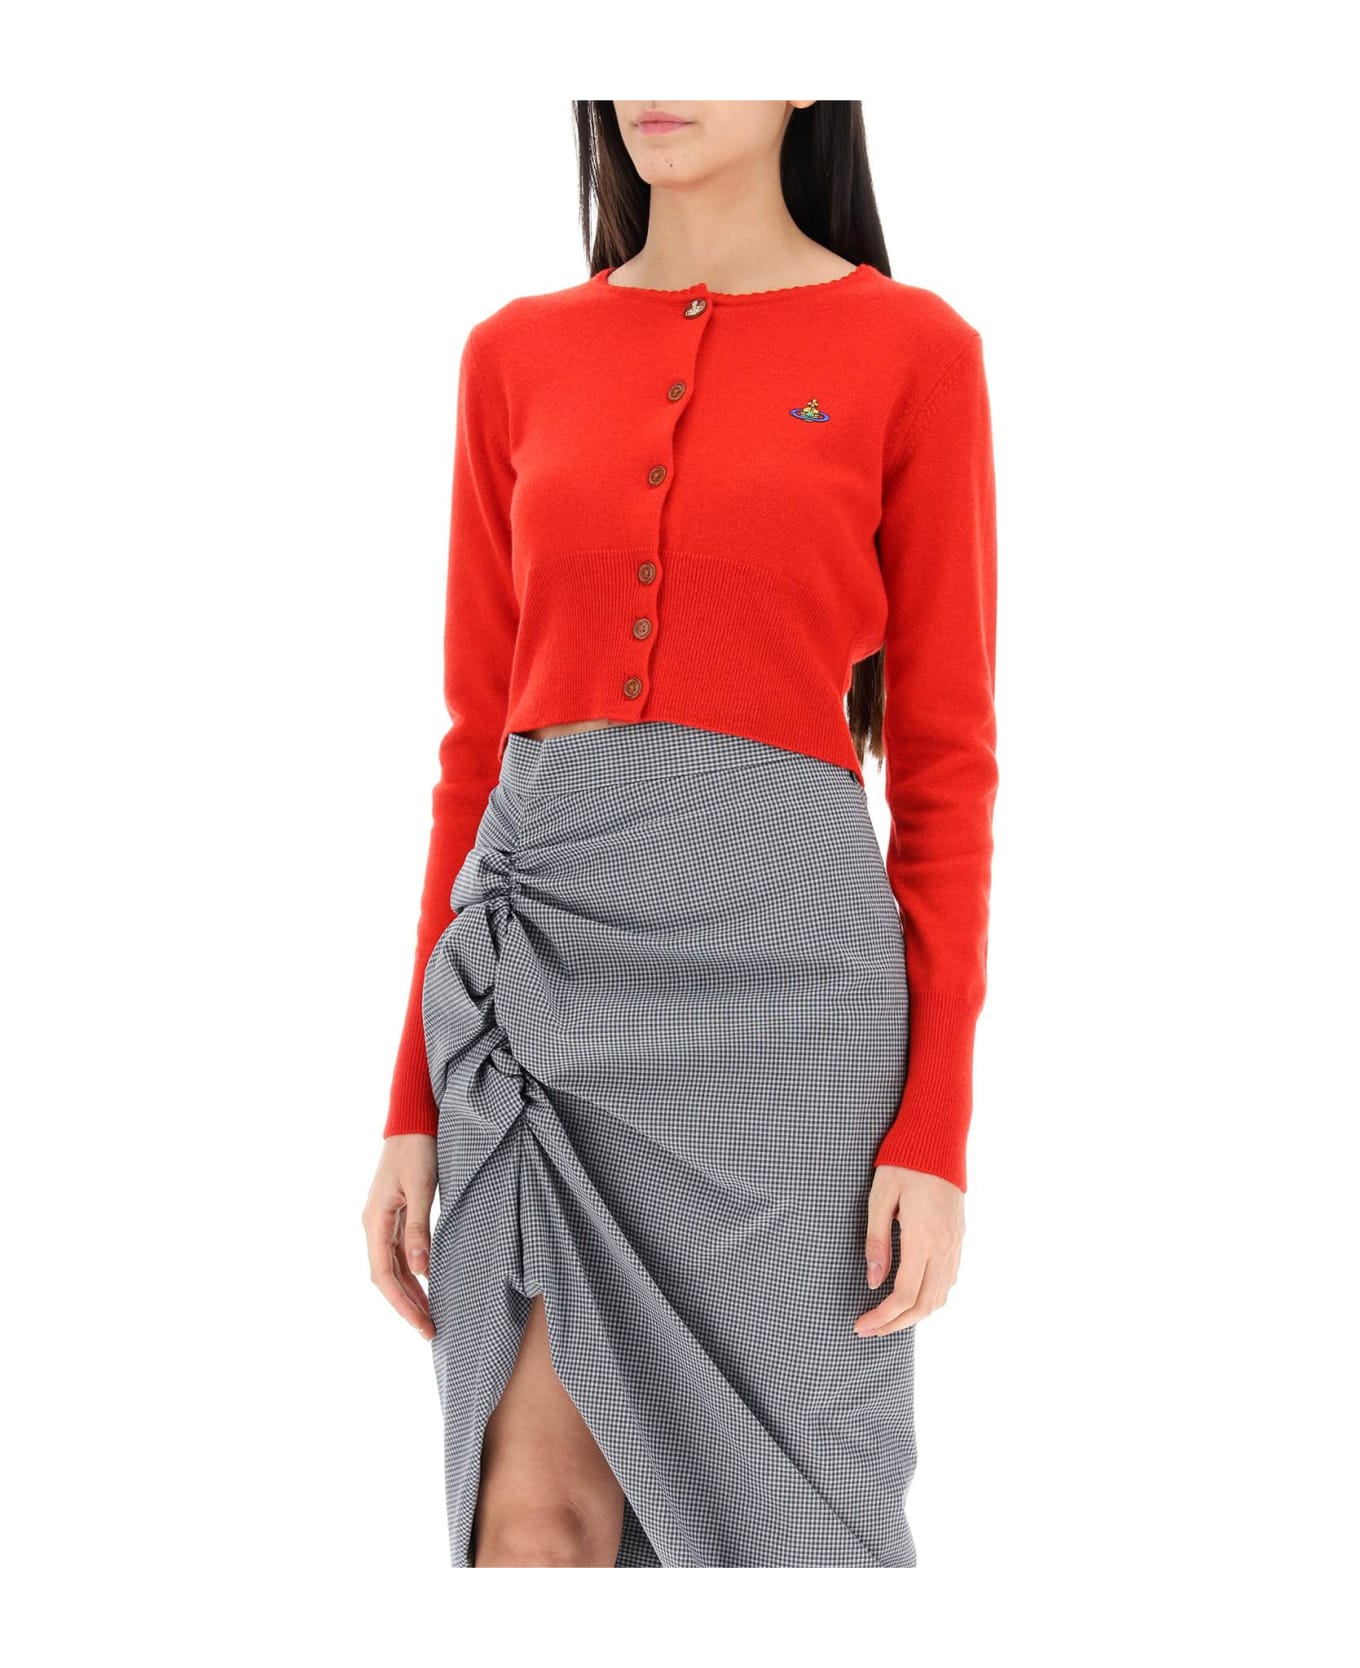 Vivienne Westwood Bea Cropped Cardigan - RED (Red) カーディガン